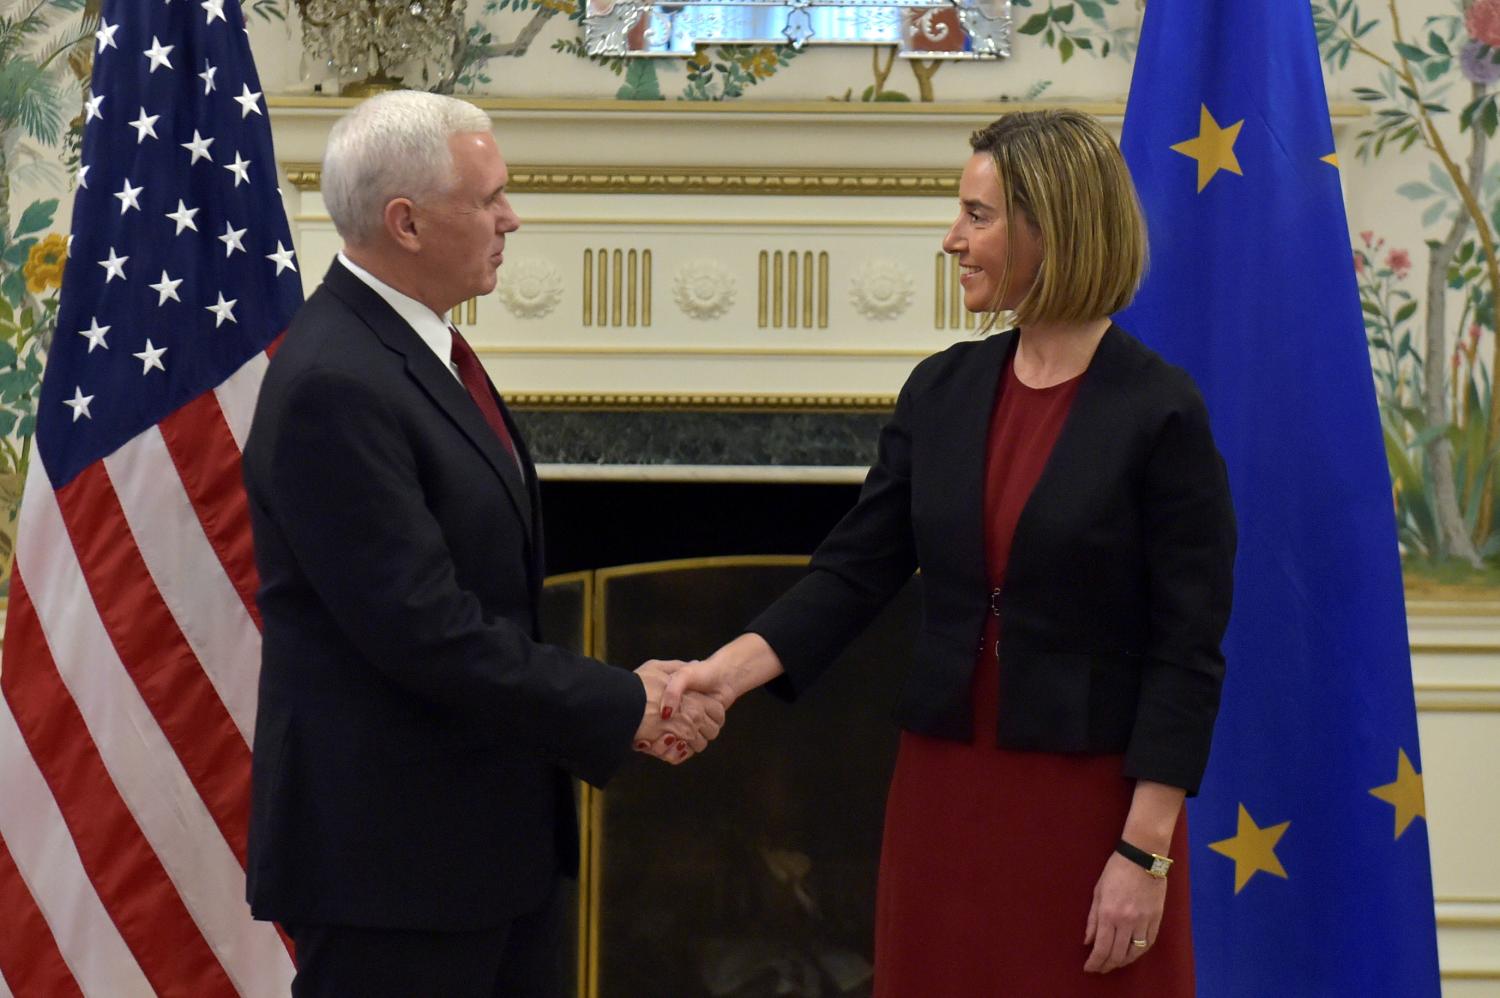 U.S. Vice President Pence shakes hands with EU foreign policy chief Mogherini in Brussels